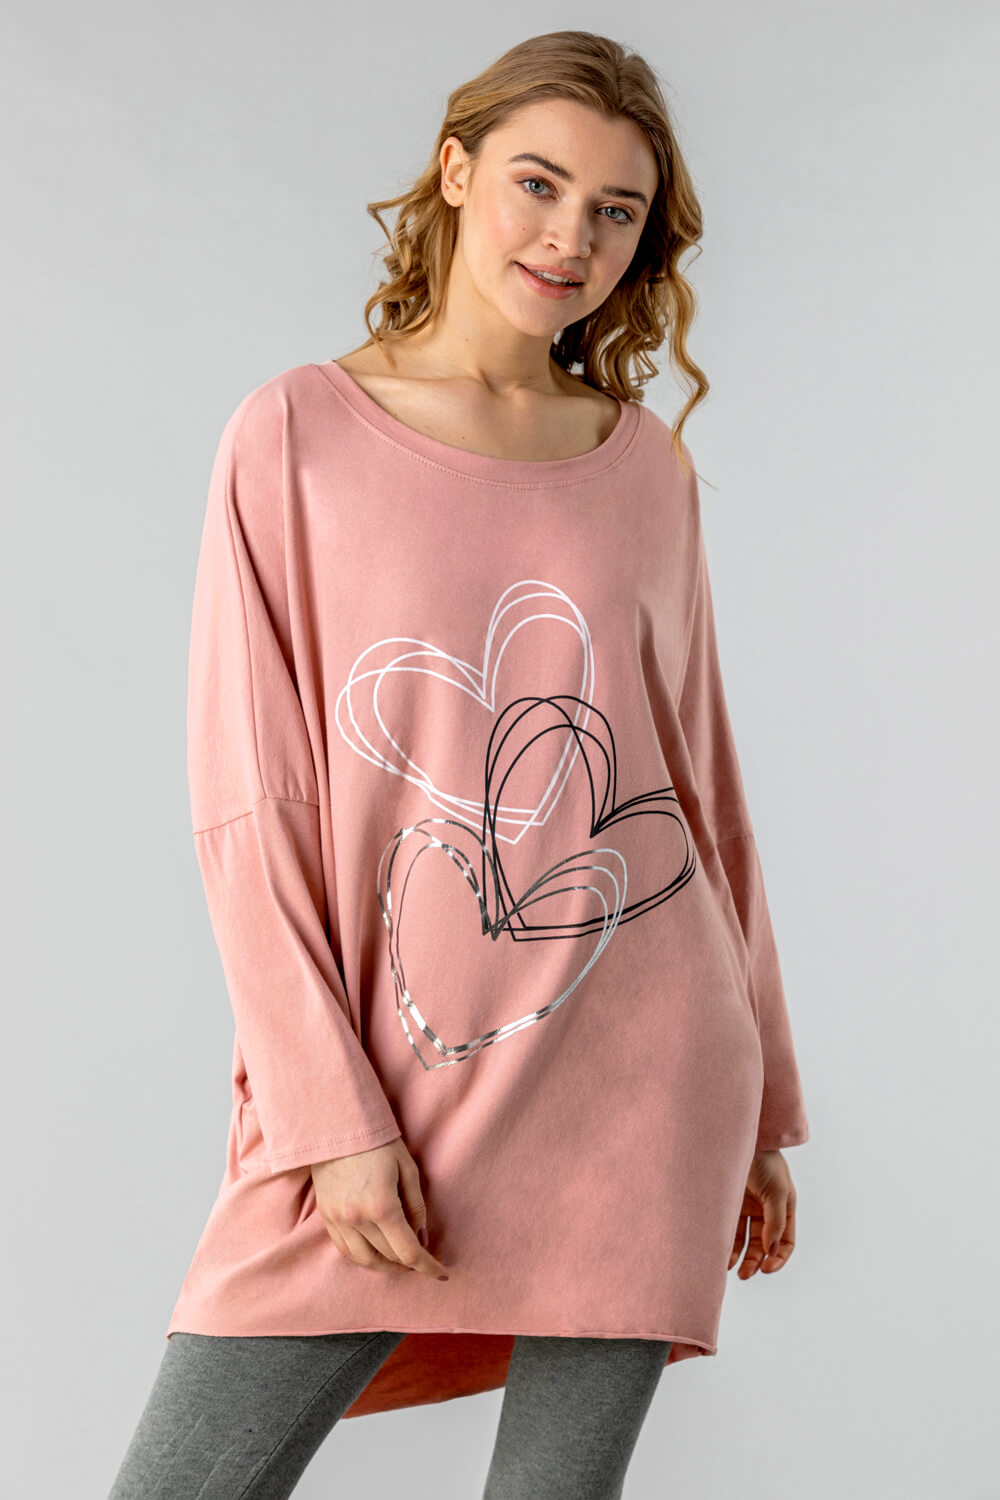 One Size Foil Heart Print Lounge Top